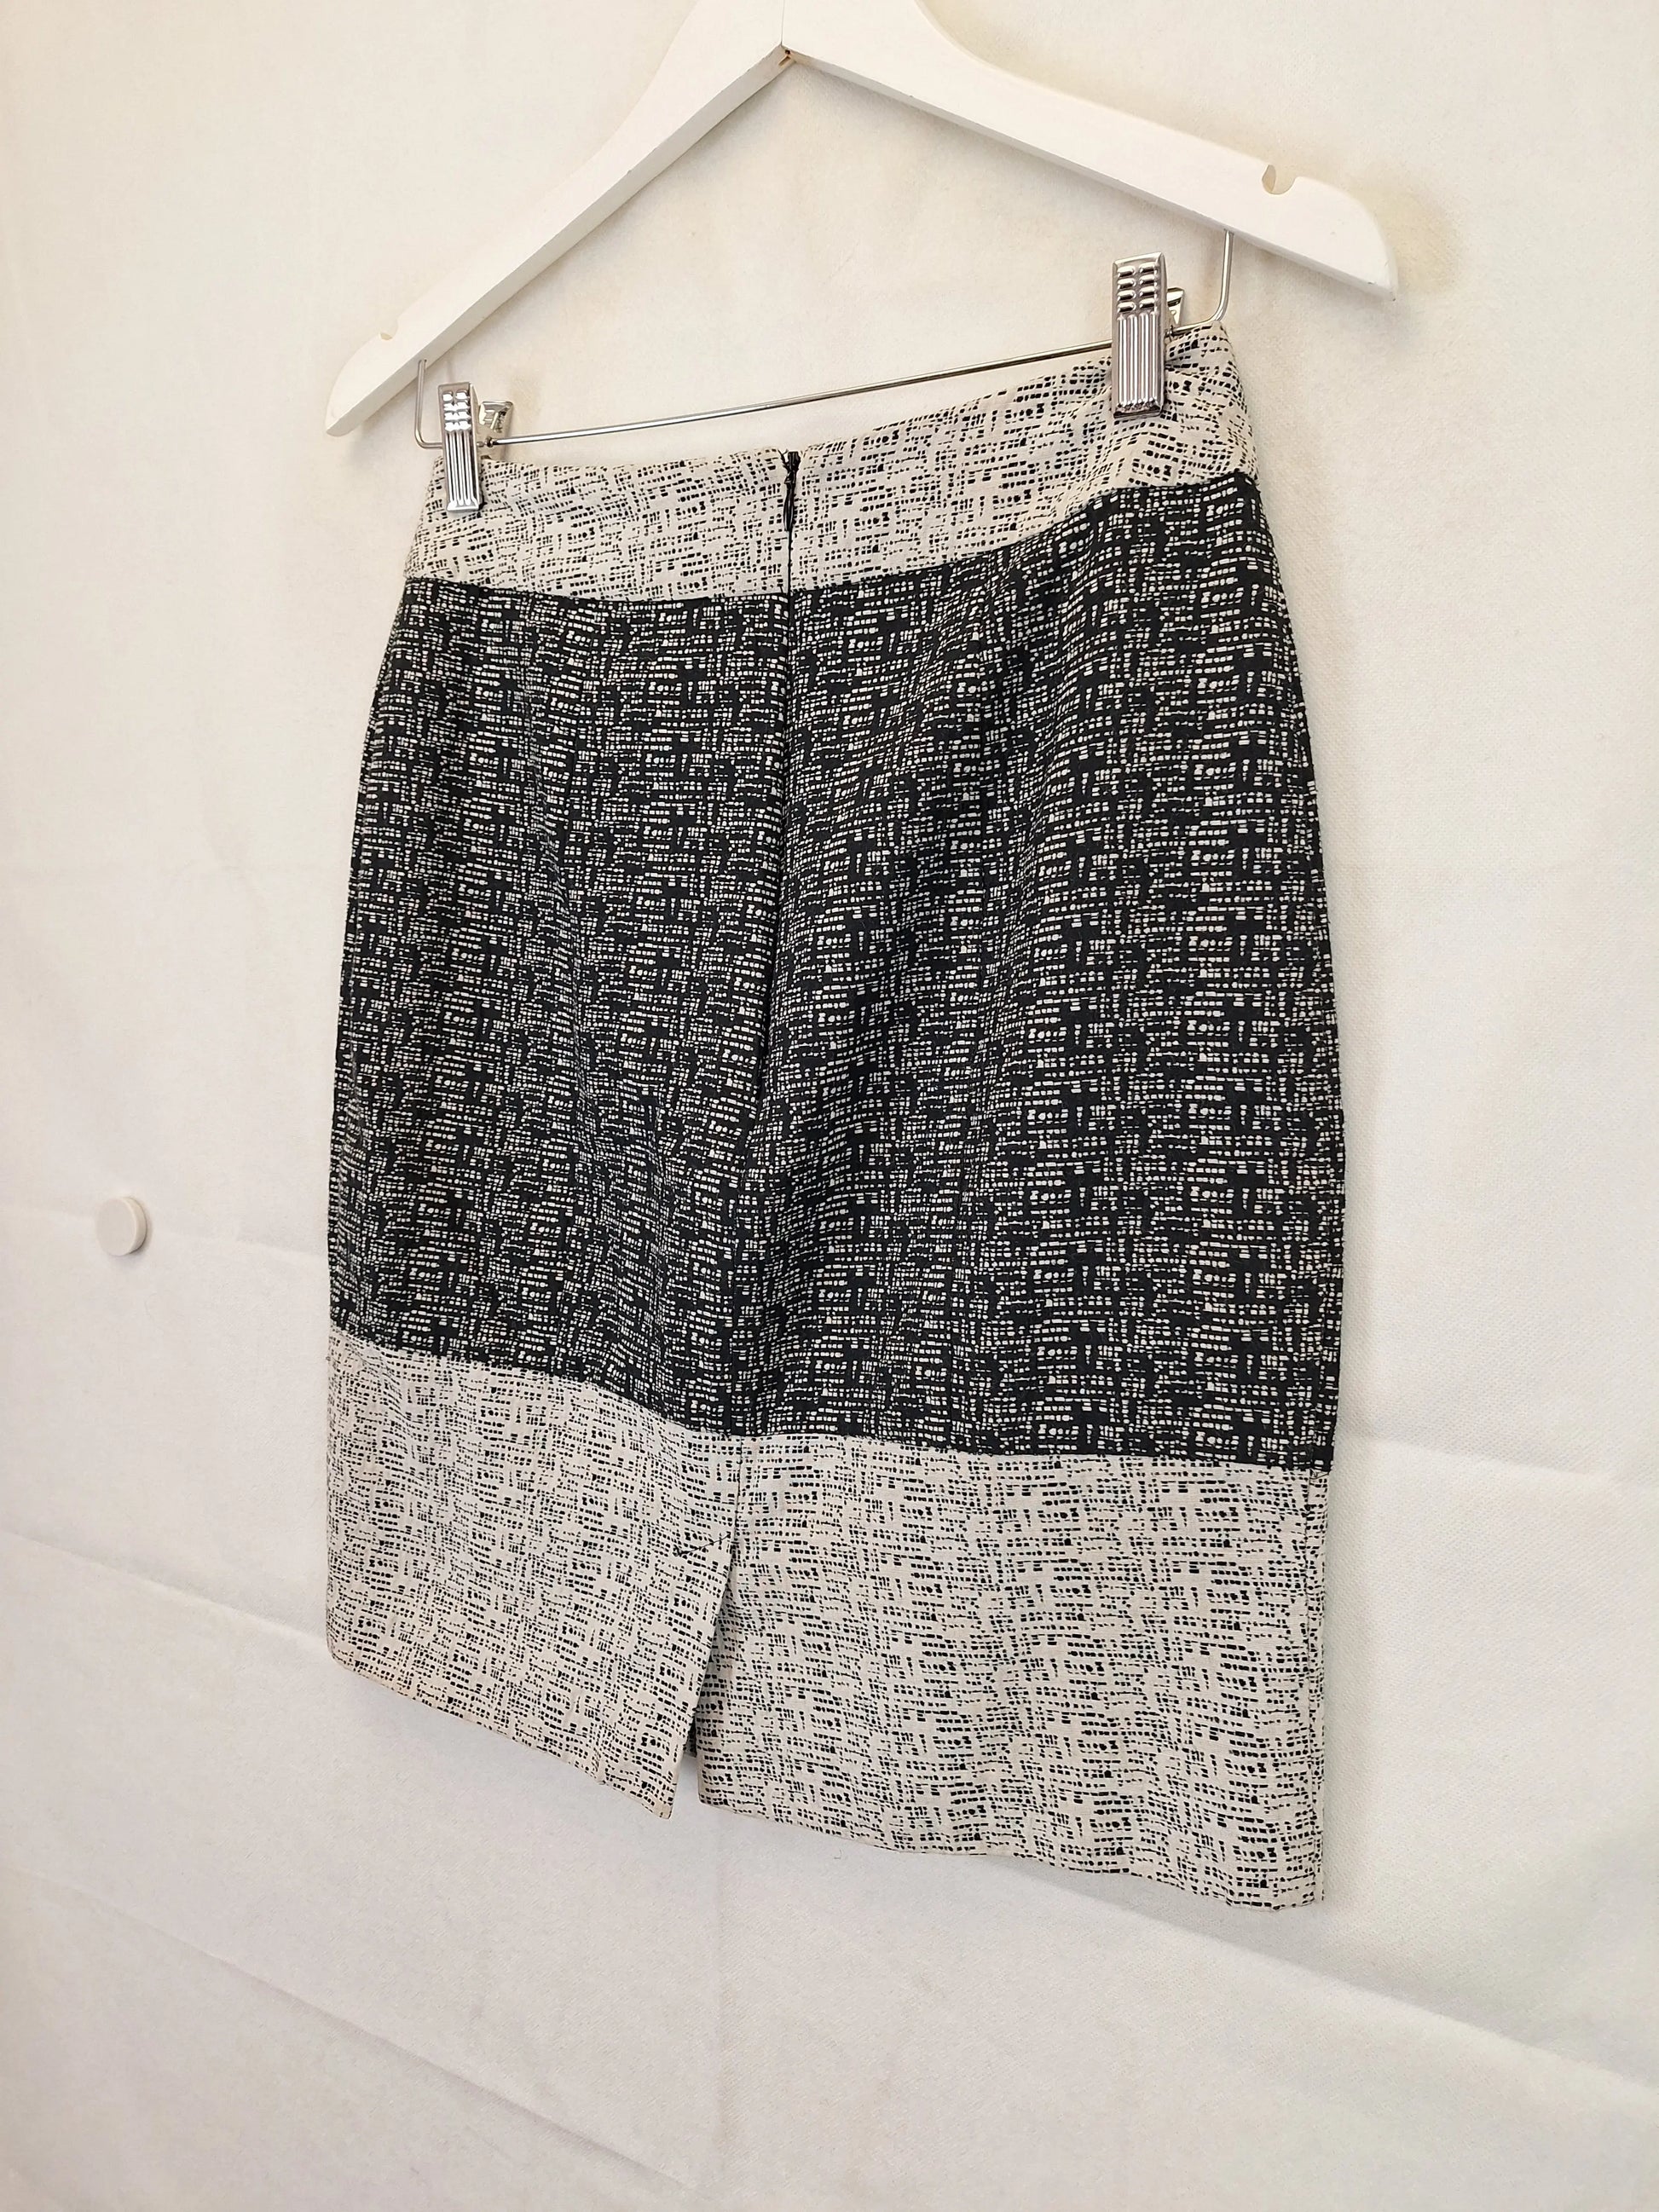 Review Two Tone Pencil Midi Skirt Size 8 by SwapUp-Online Second Hand Store-Online Thrift Store